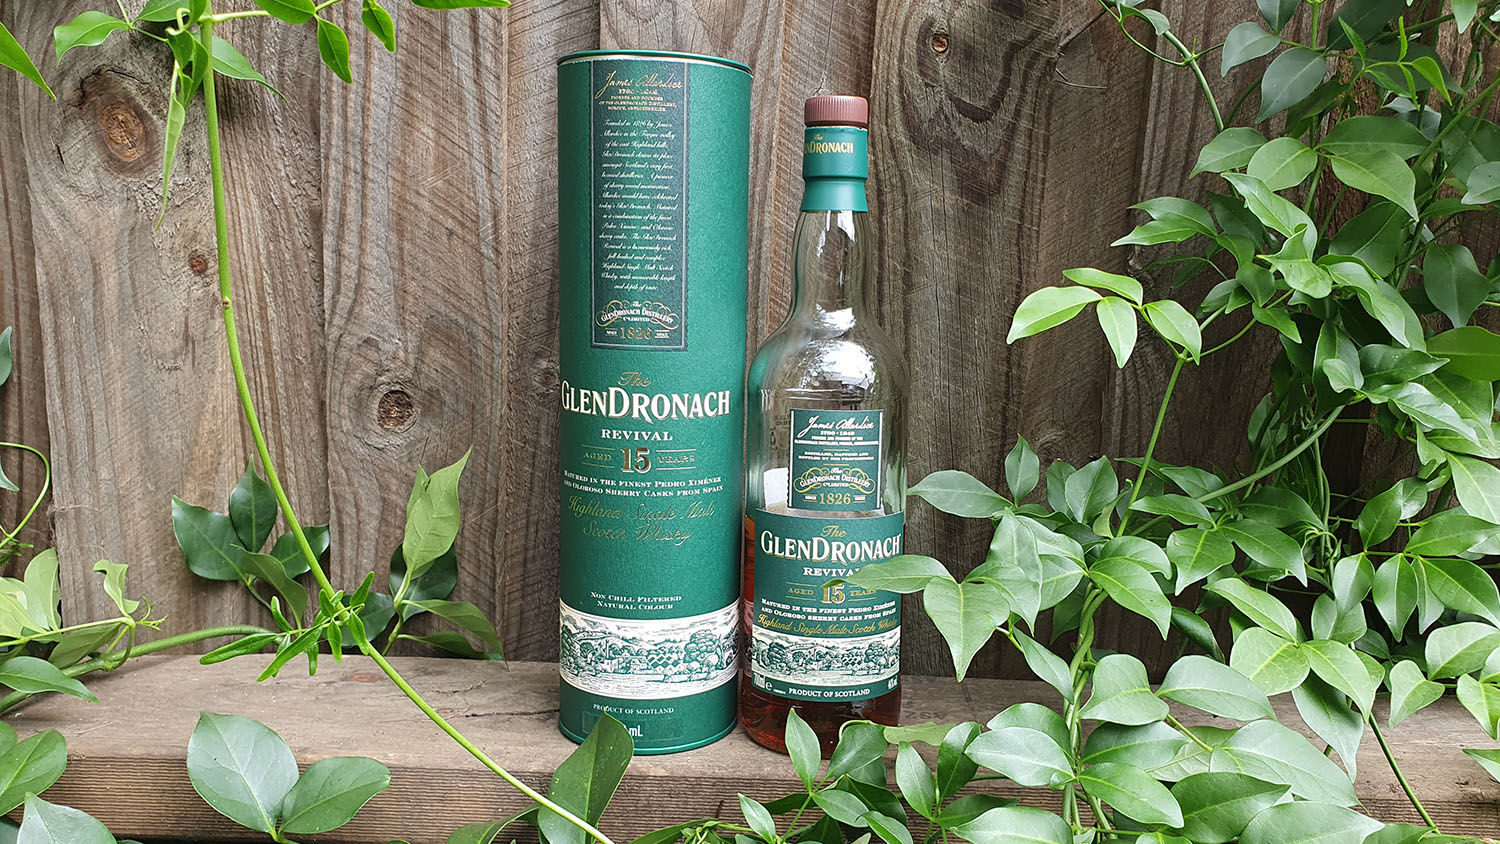 Glendronach 15 Year Old Whisky Review